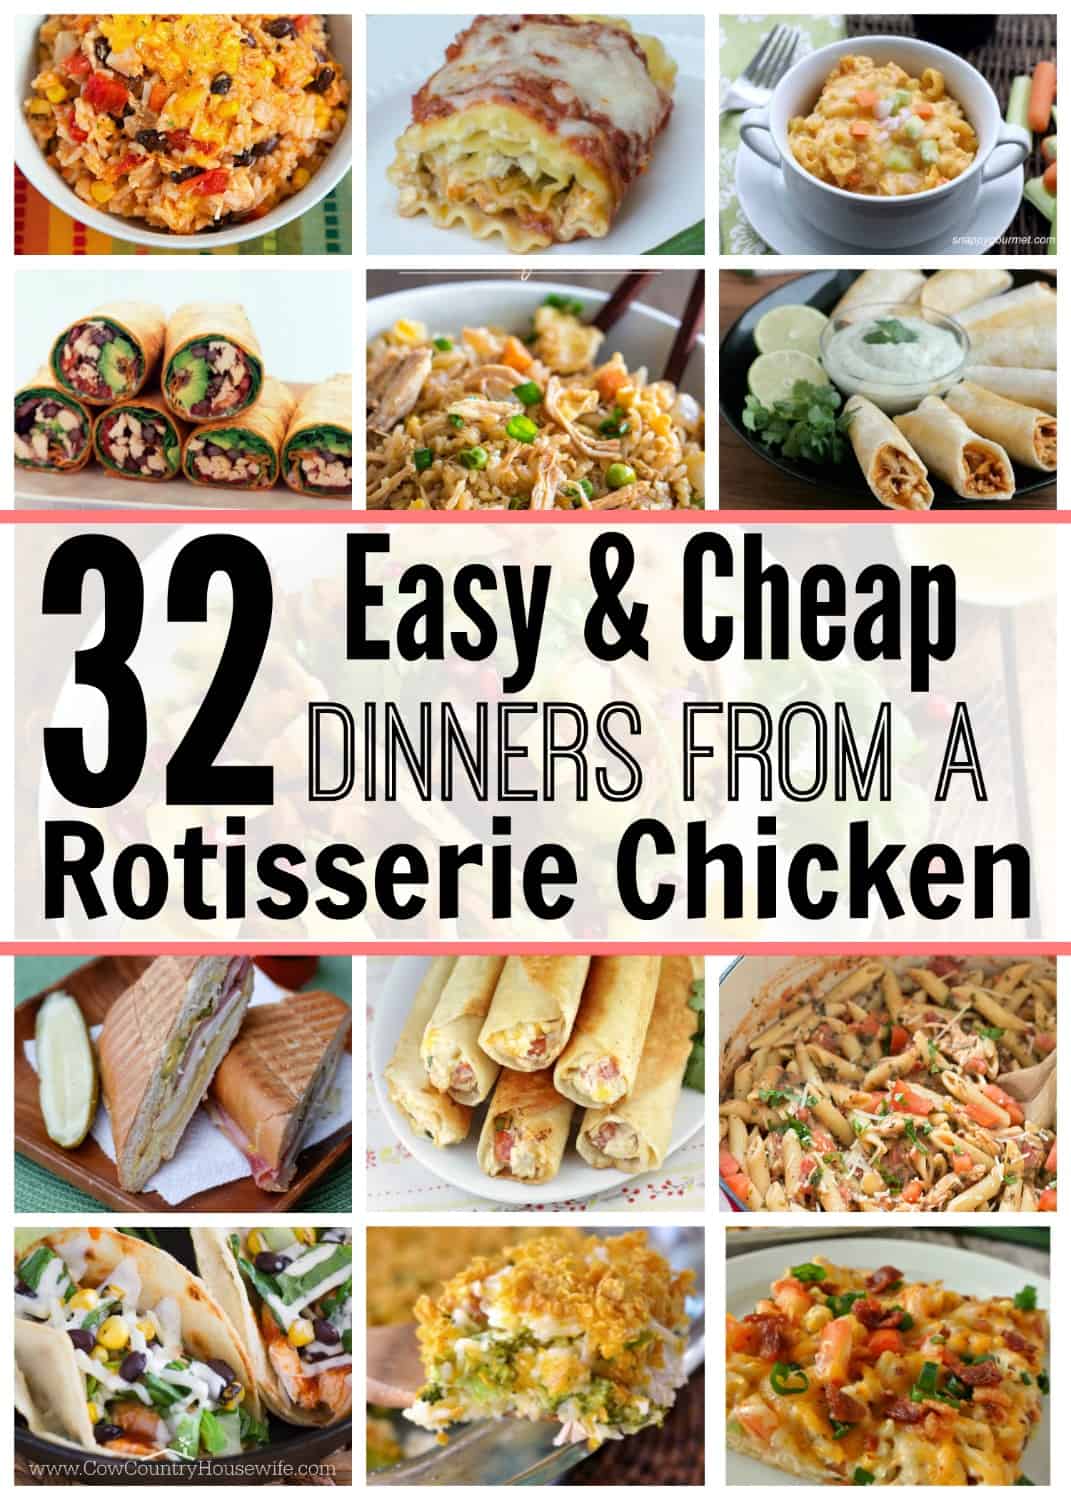 32 Easy & Cheap Dinners From a Rotisserie Chicken - Caroline Vencil